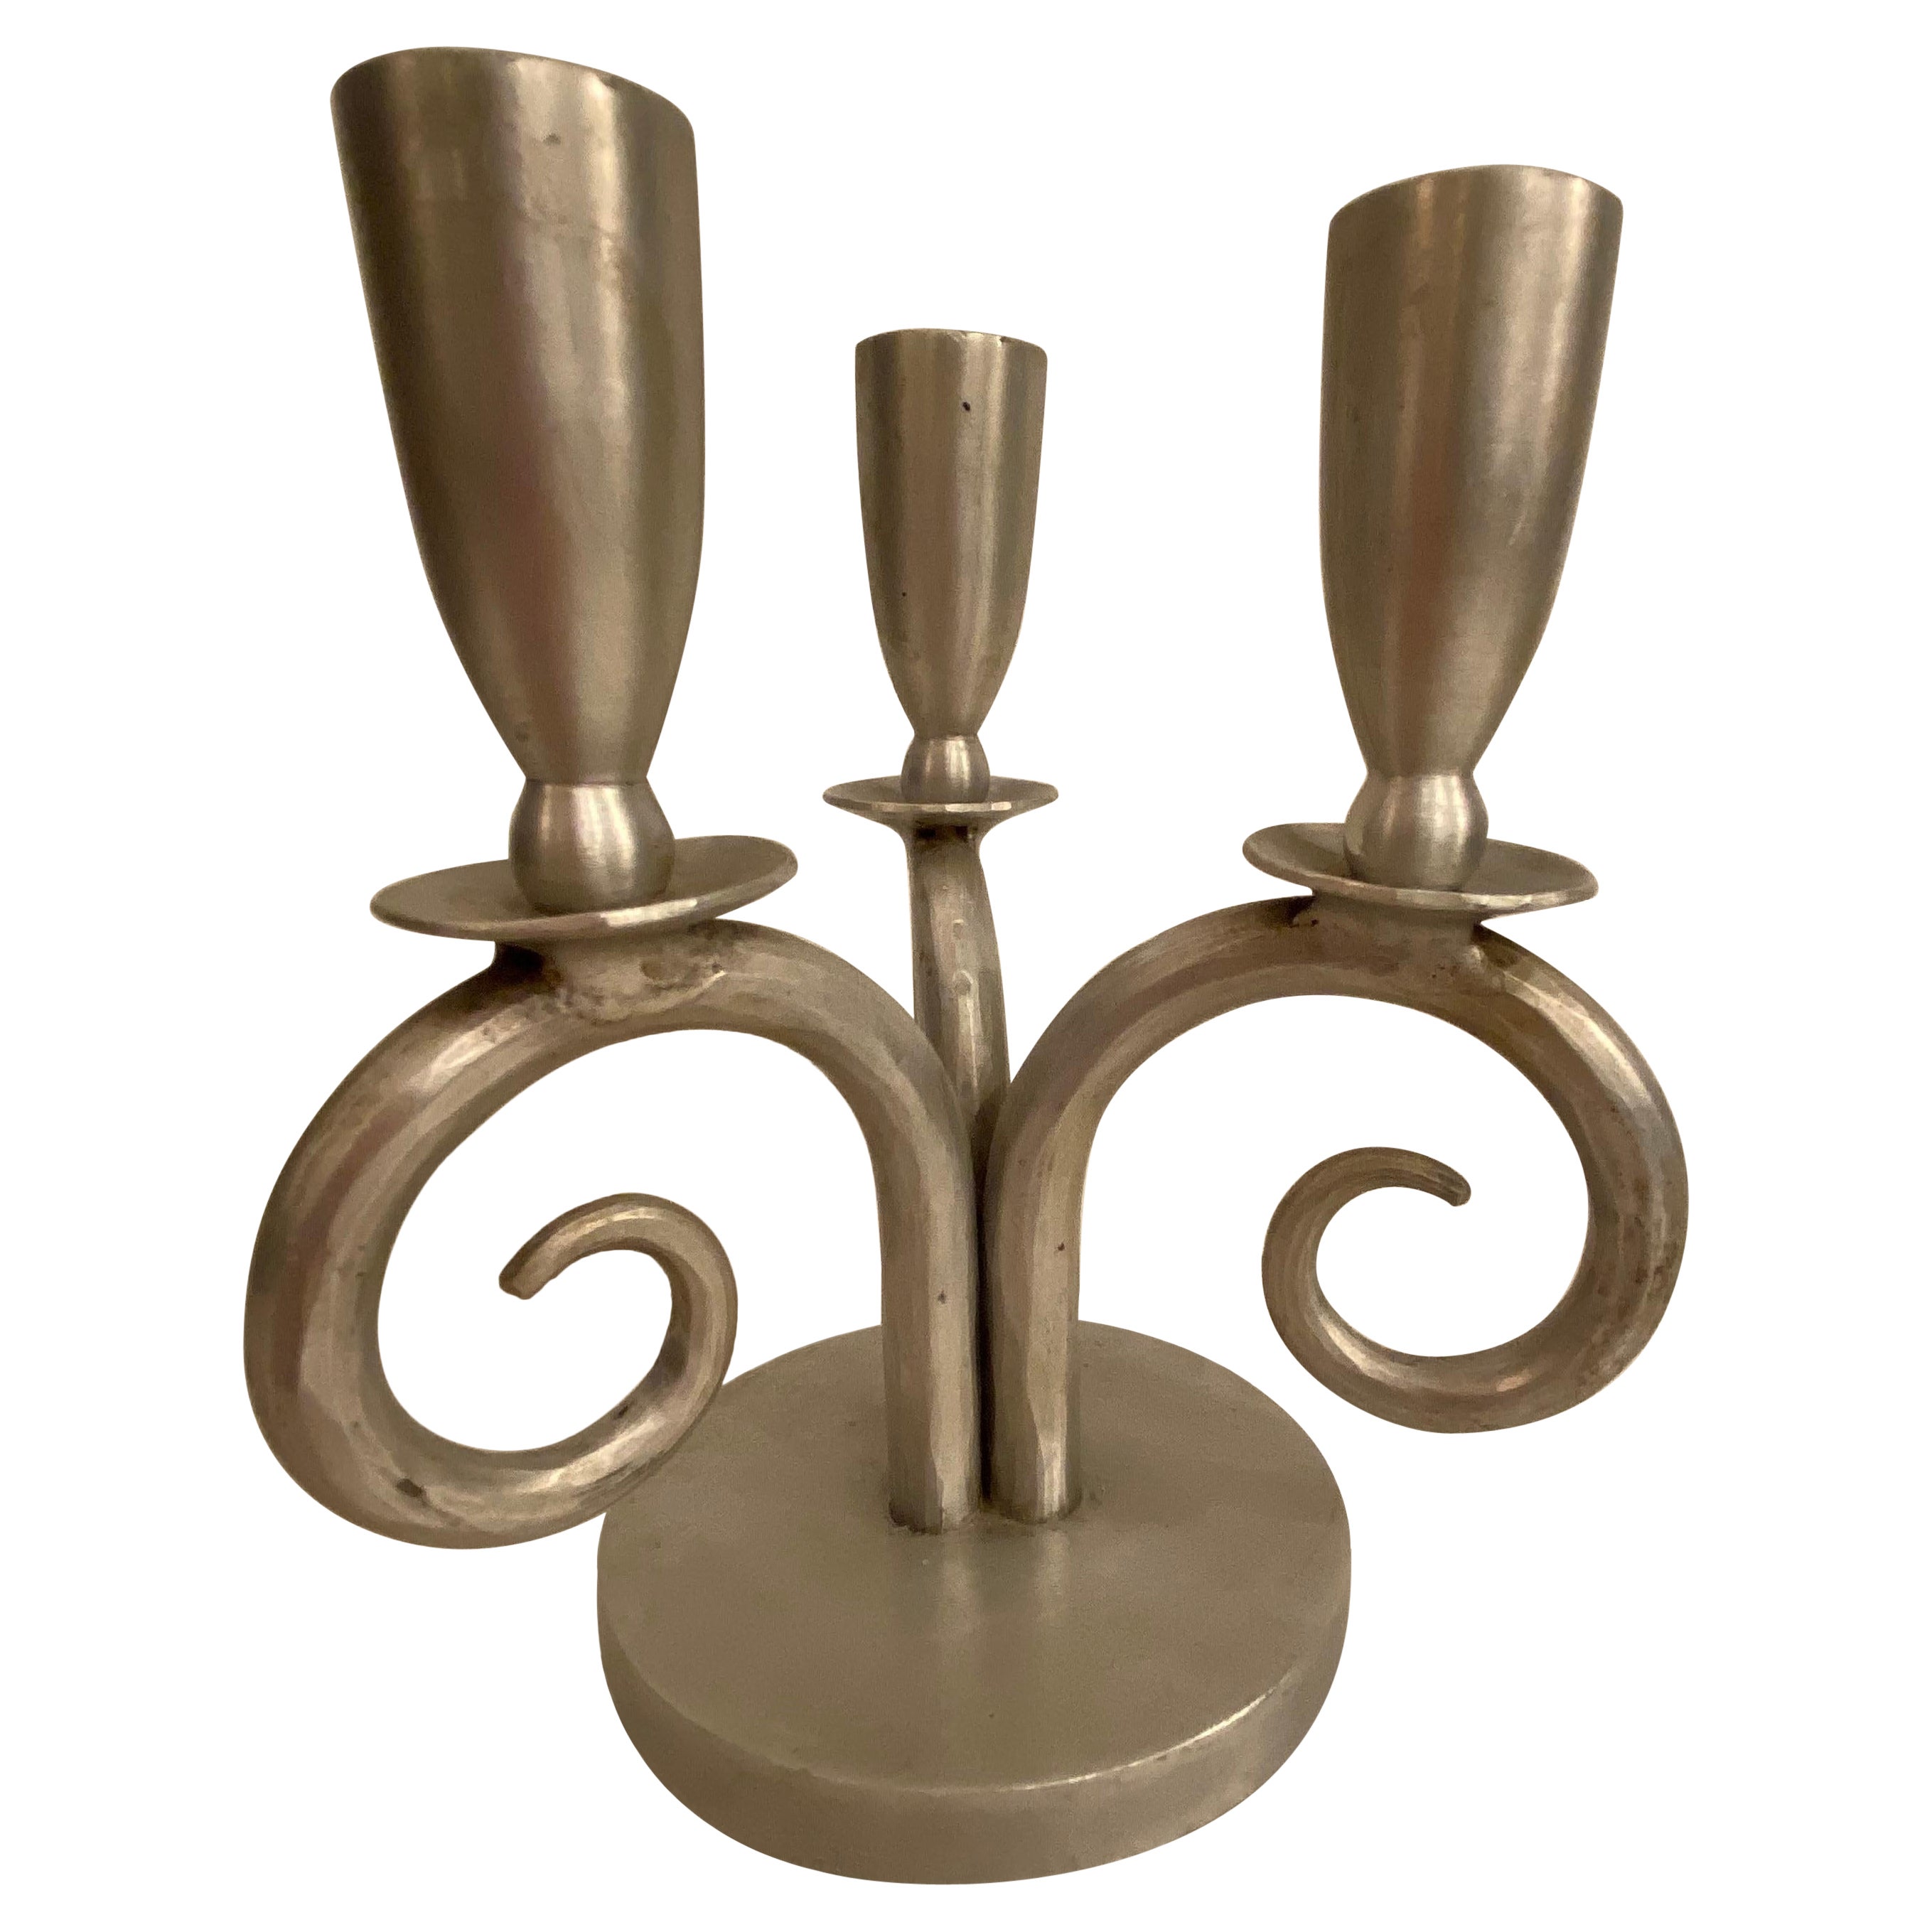 Palmer-Smith Aluminum Candlestick For Sale